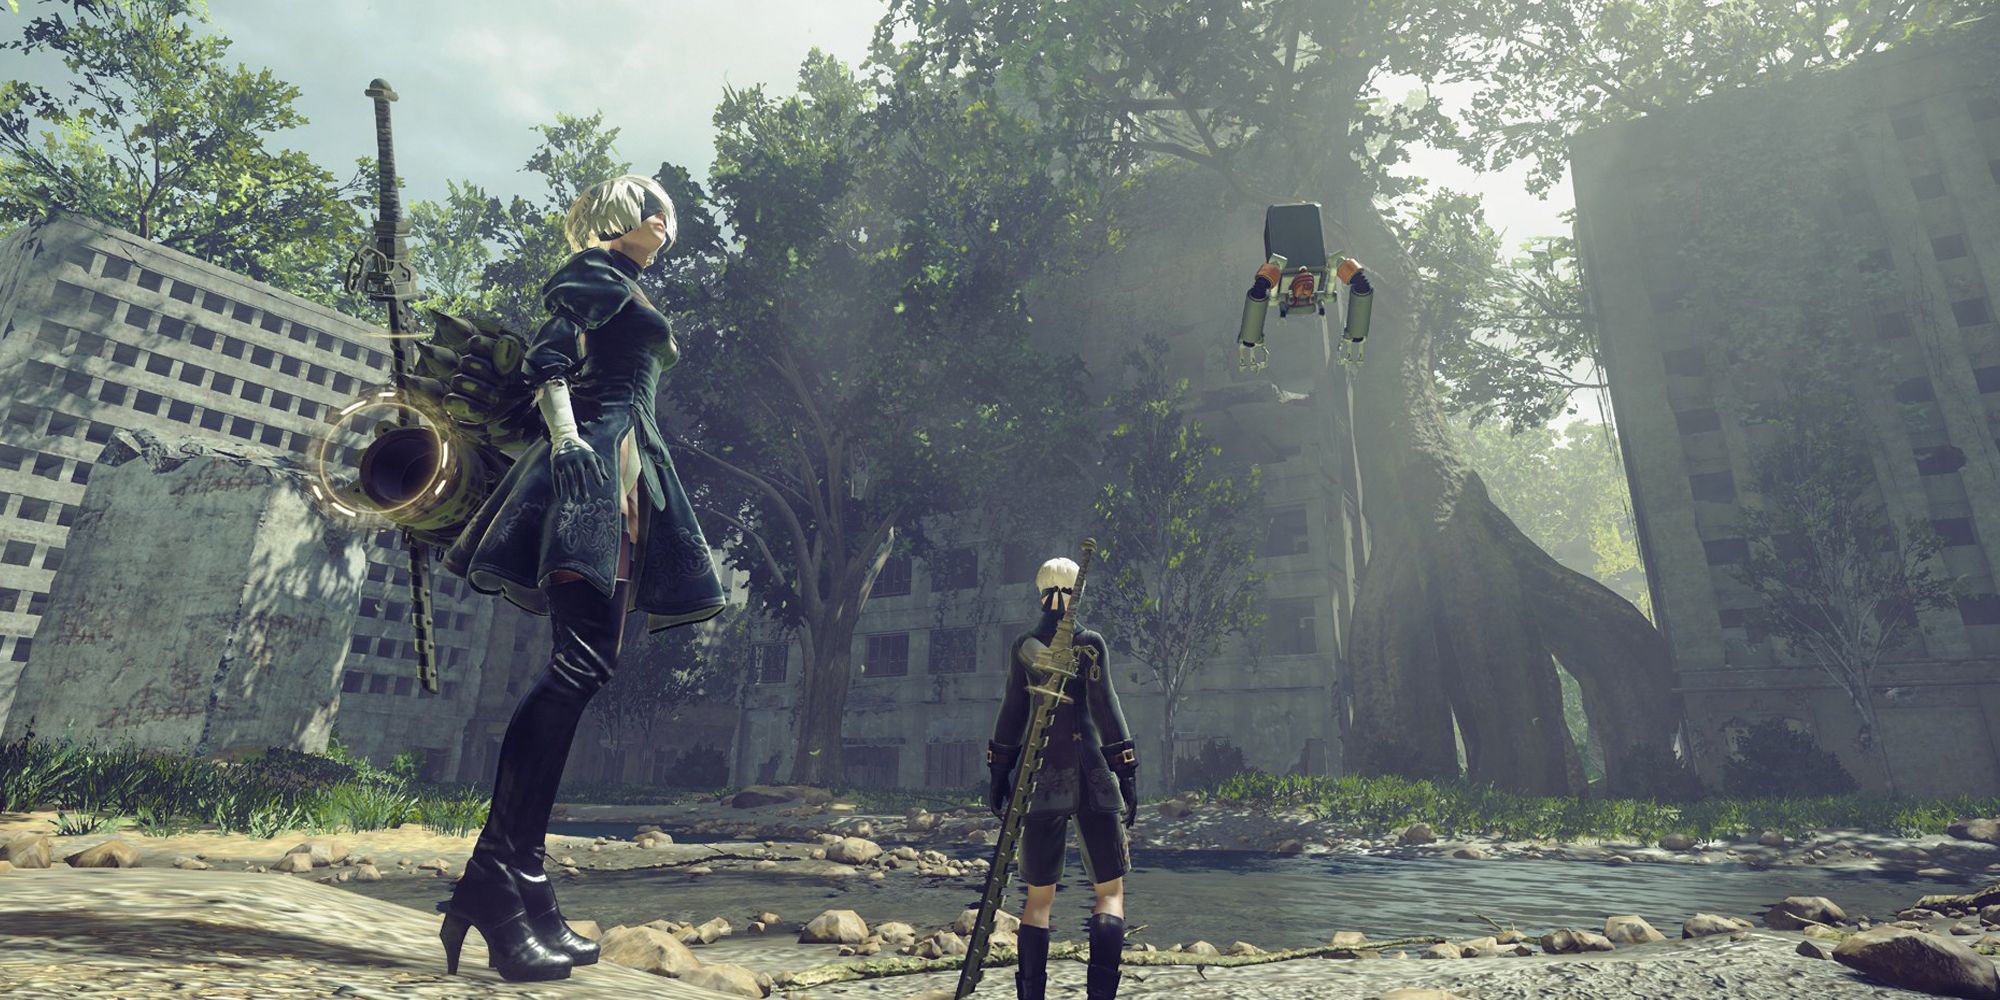 Nier Automata two characters standing in an overgrown abandoned city.